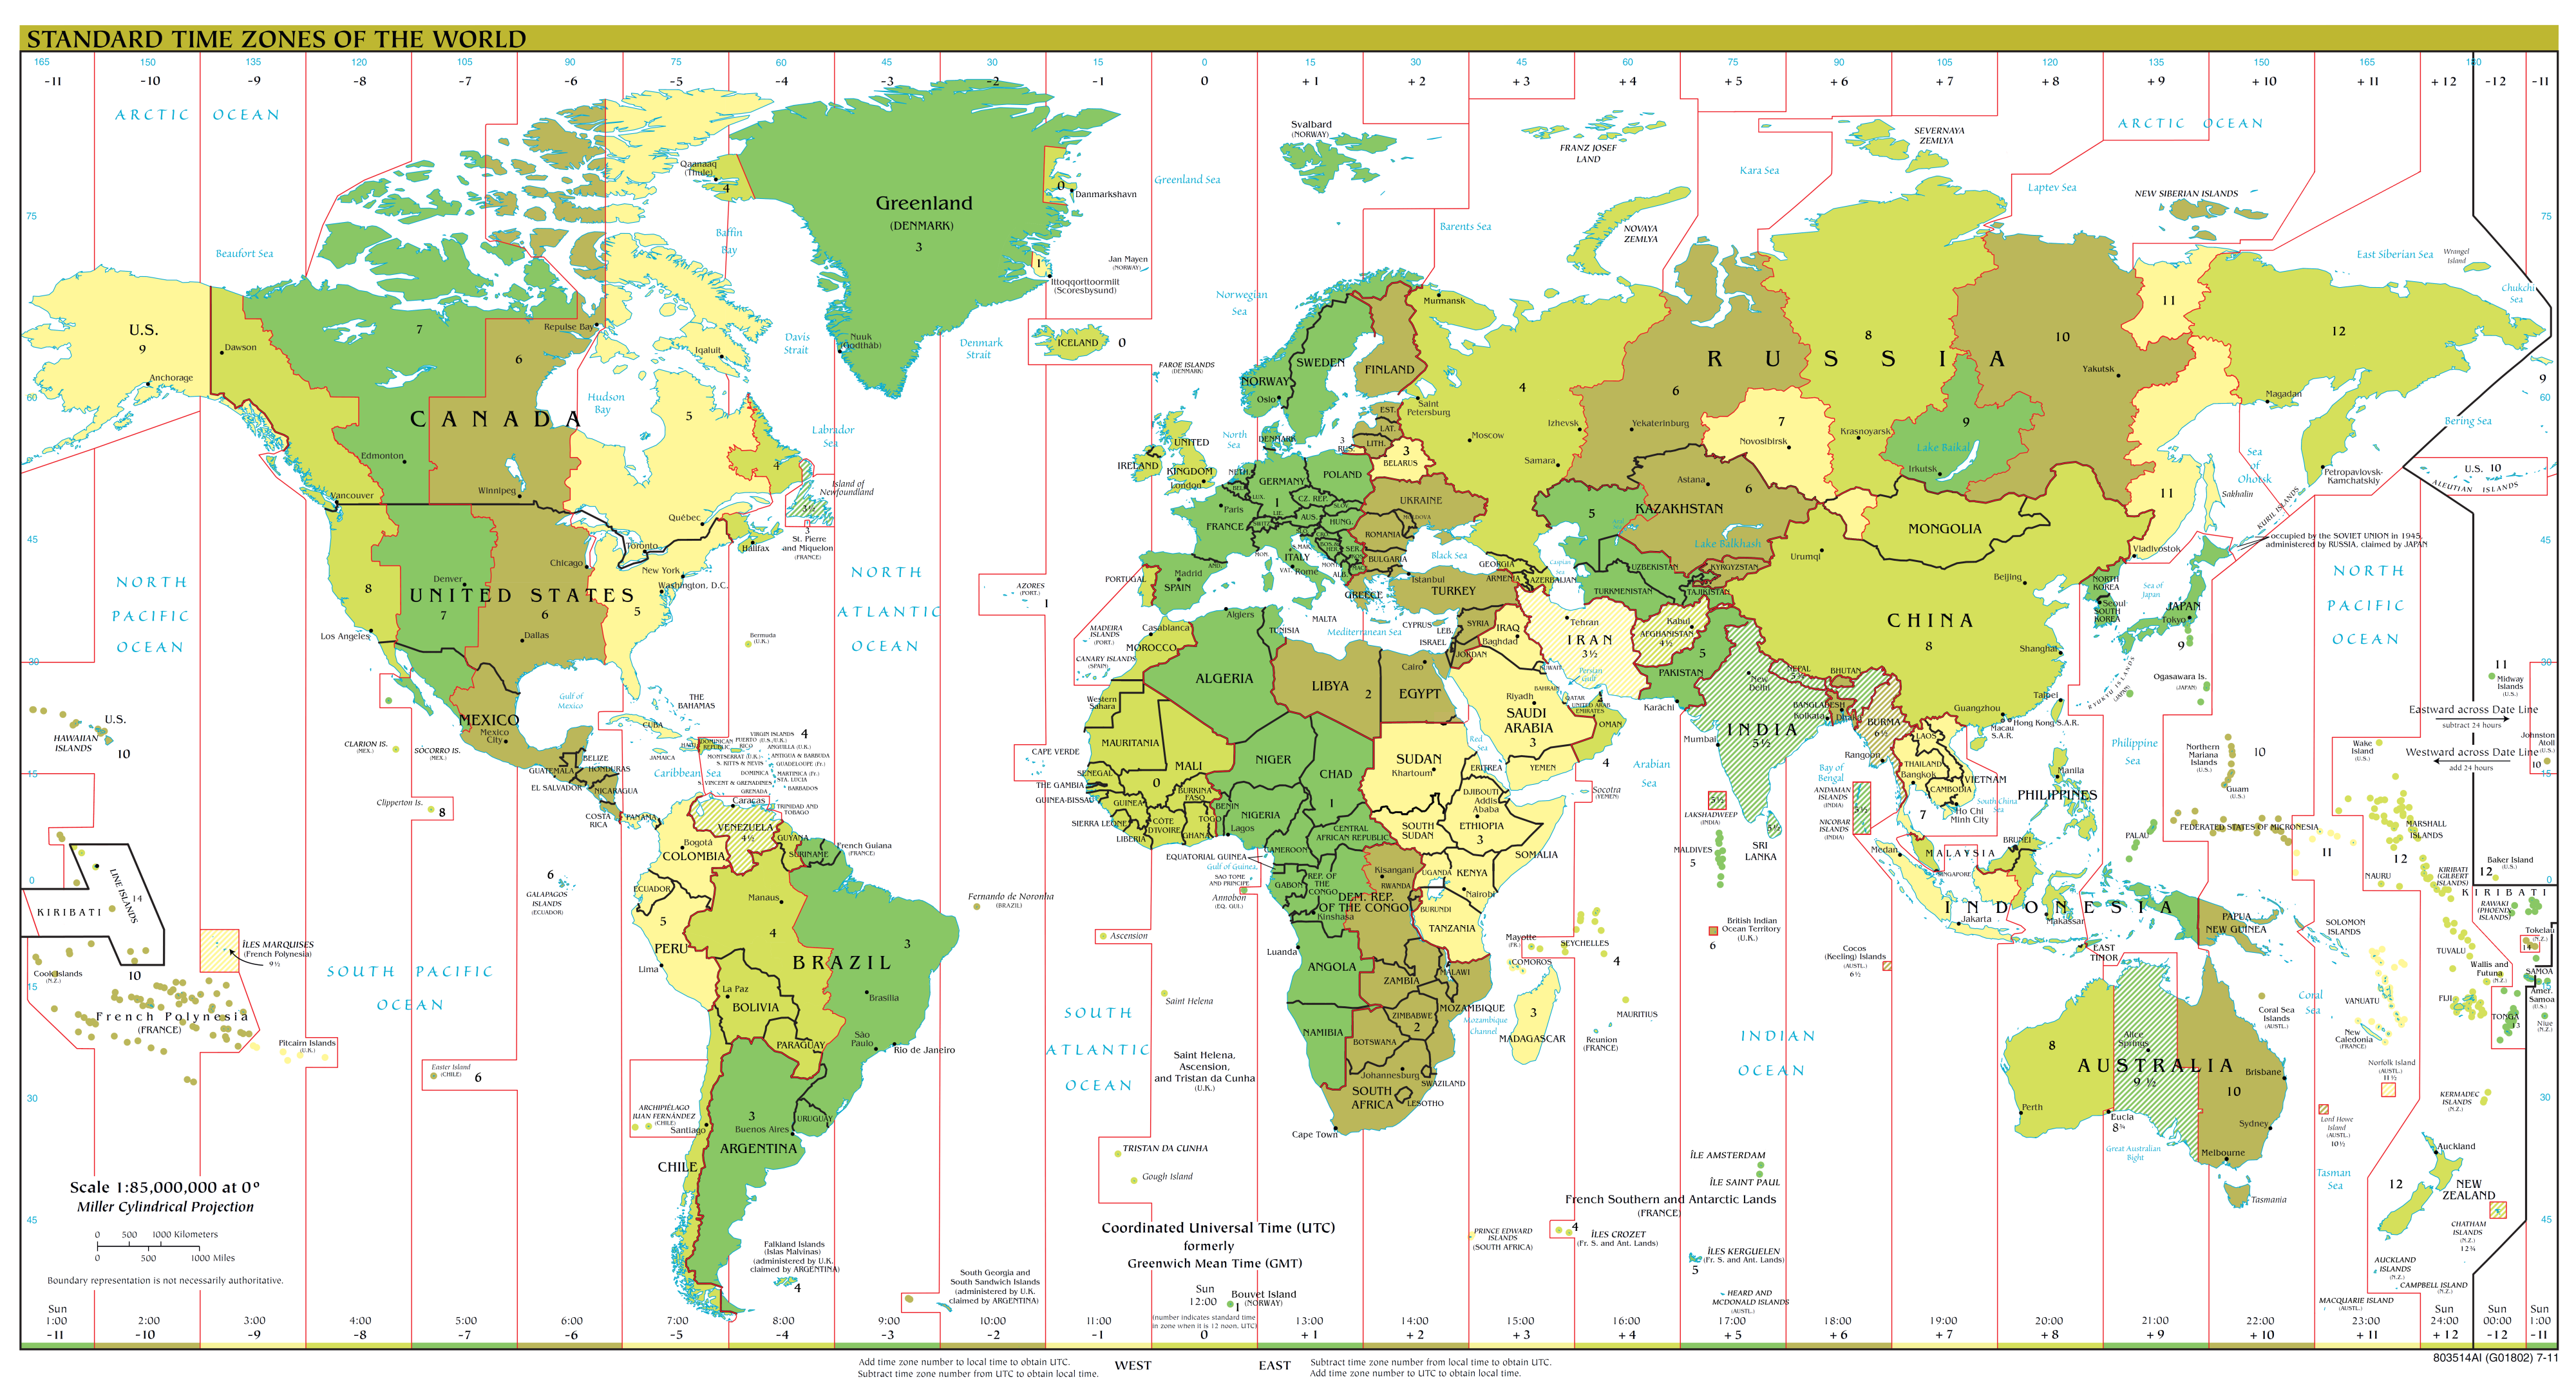 Standard_time_zones_of_the_world_big